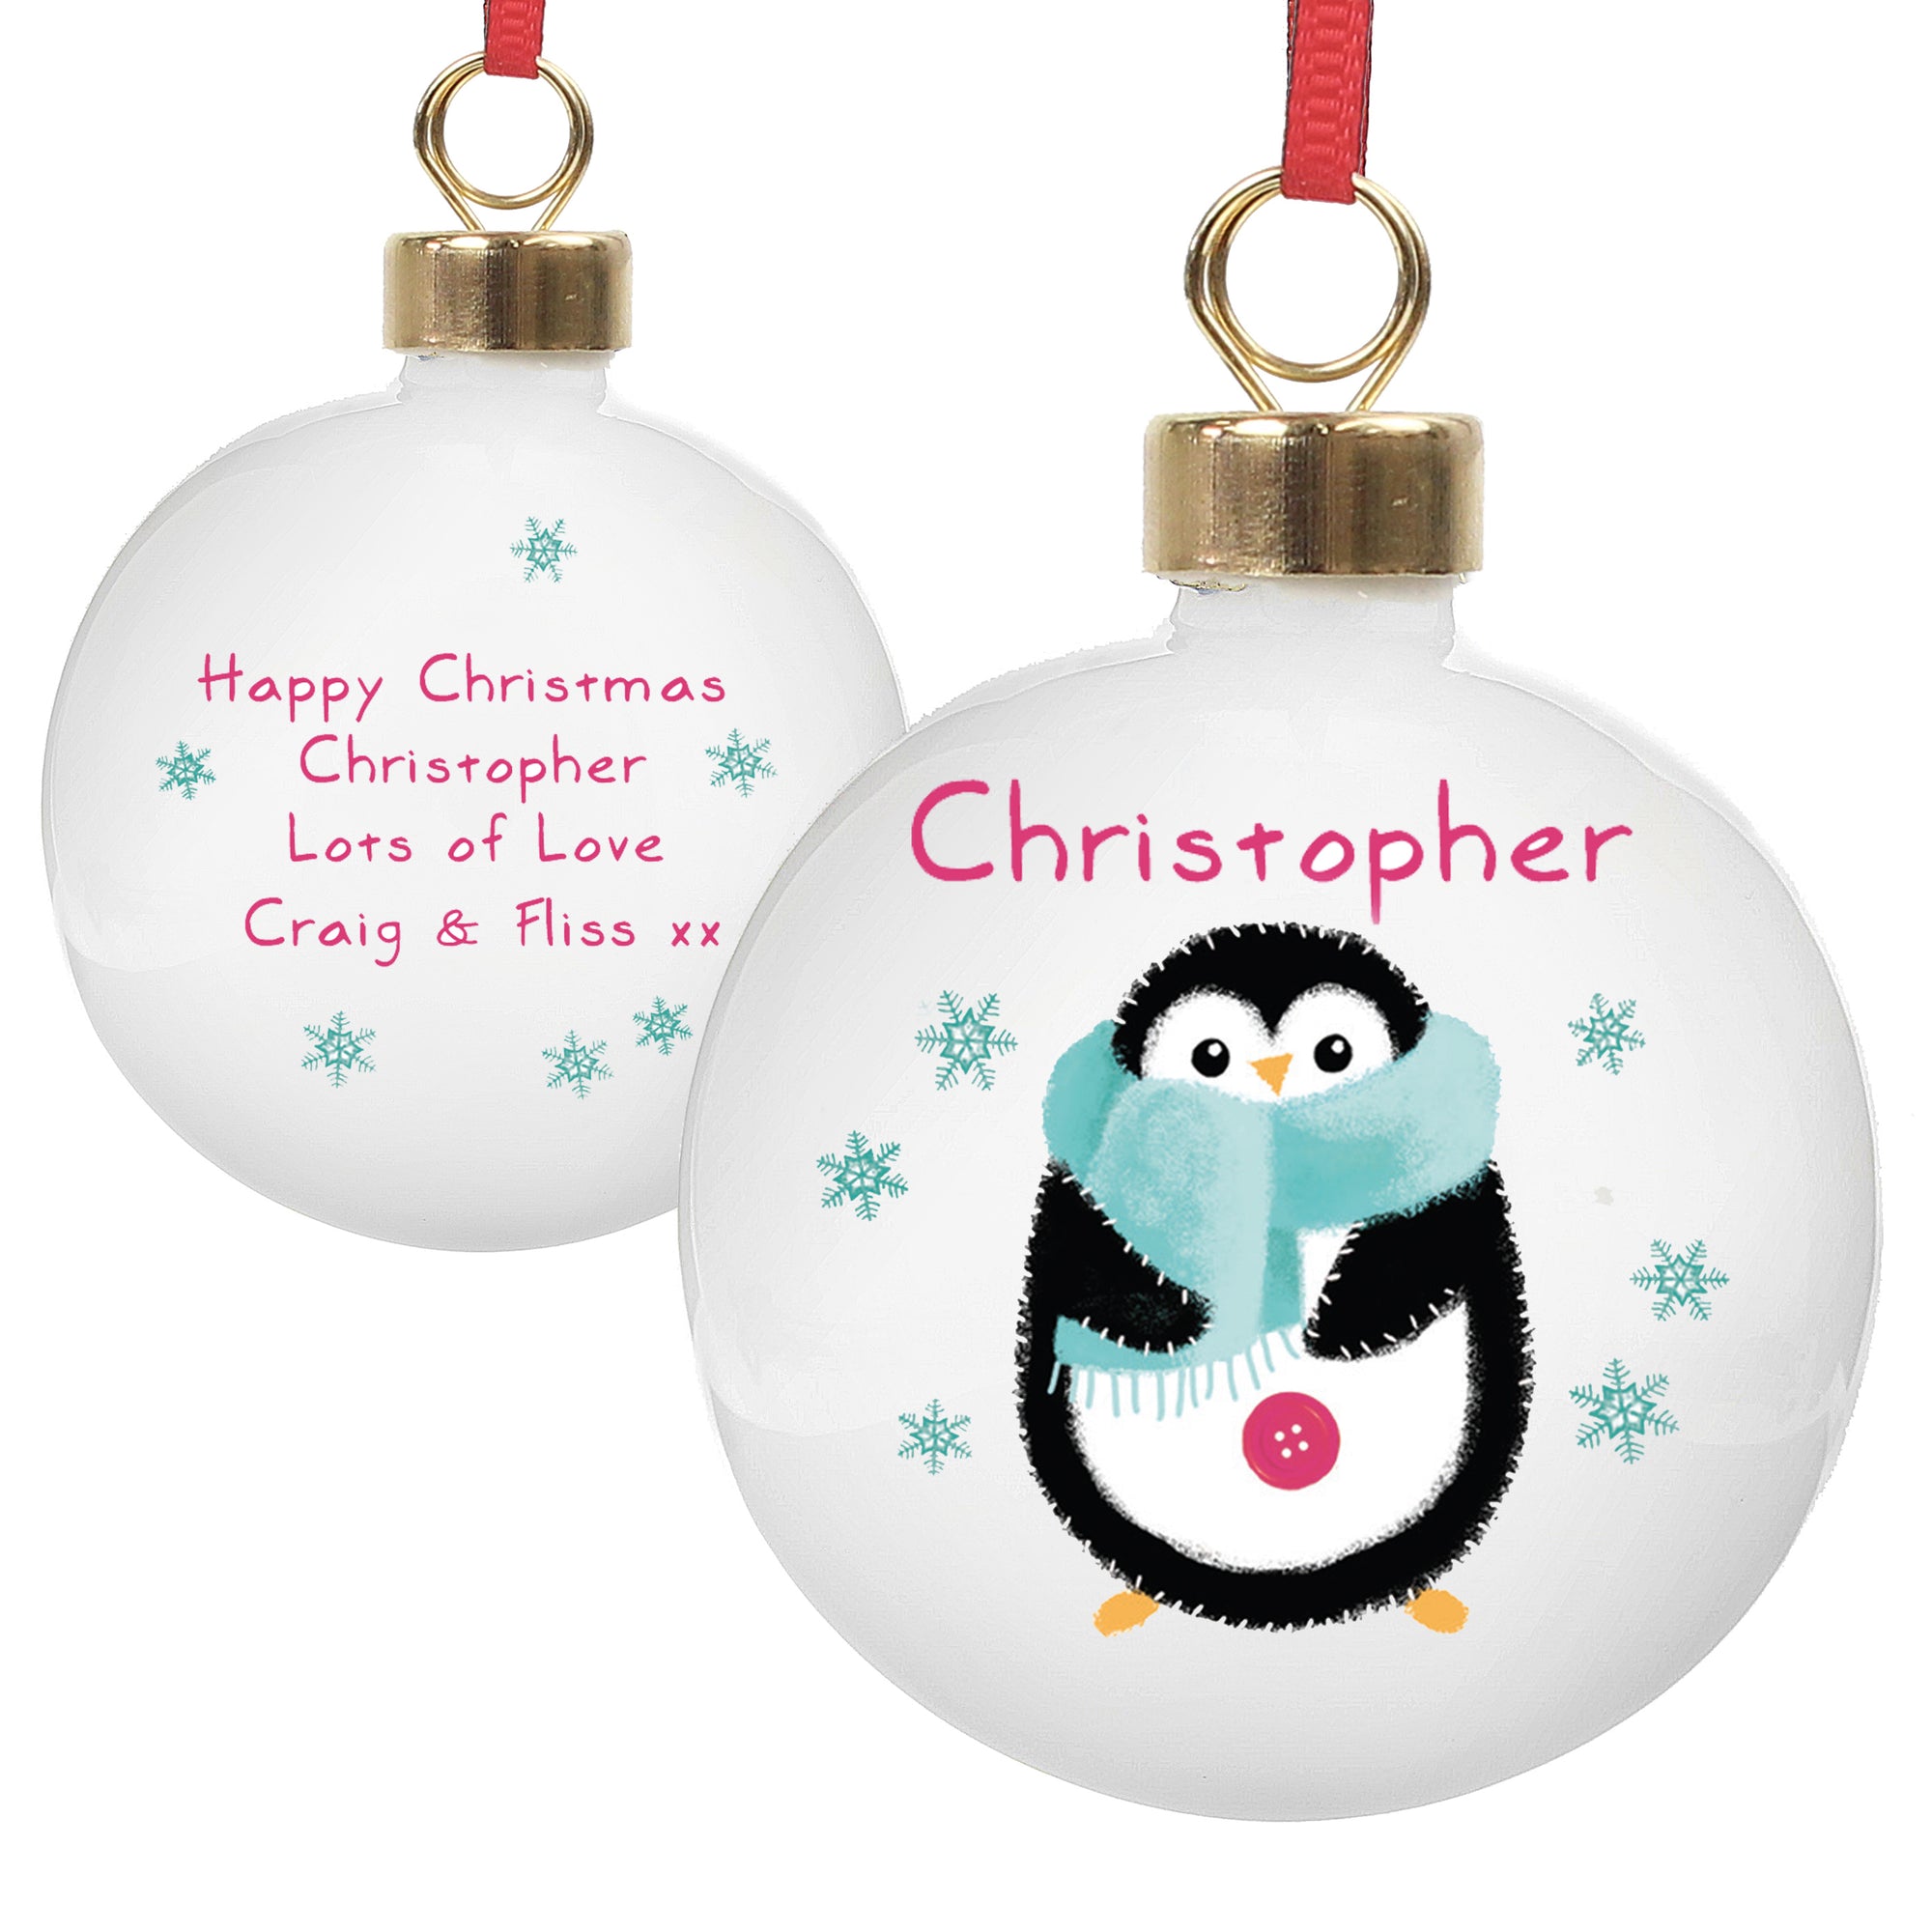 Personalised white ceramic Christmas tree bauble with an illlustration of a hand-drawn penguin on the front wearing a blue scarf and a name of your choice in a red font printed above the penguin. The rear of the bauble can be personalised with your own special message over up to 4 lines.